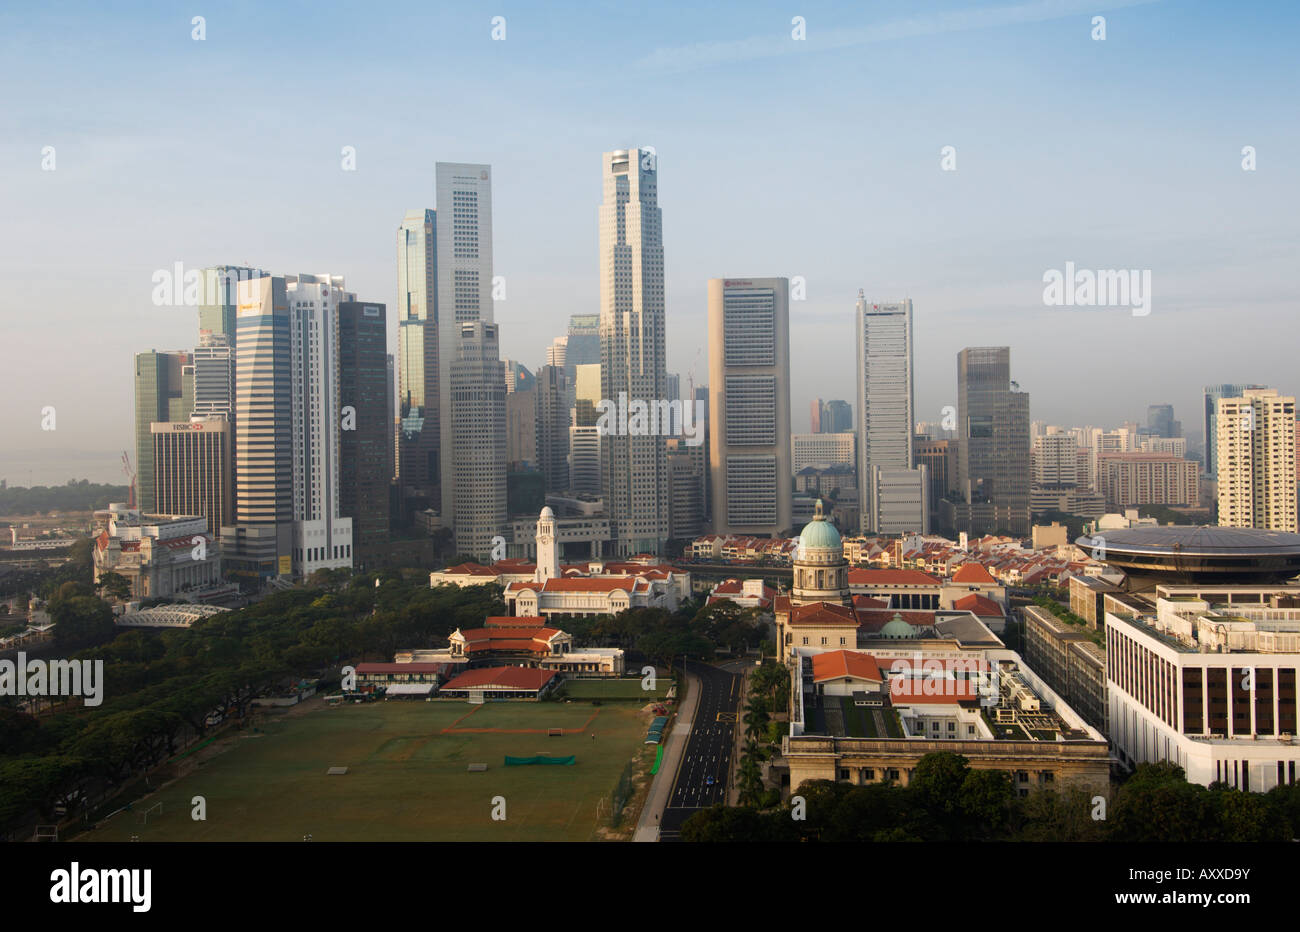 Singapore skyline with the Padang and Colonial District in the foreground, Singapore, South East Asia Stock Photo